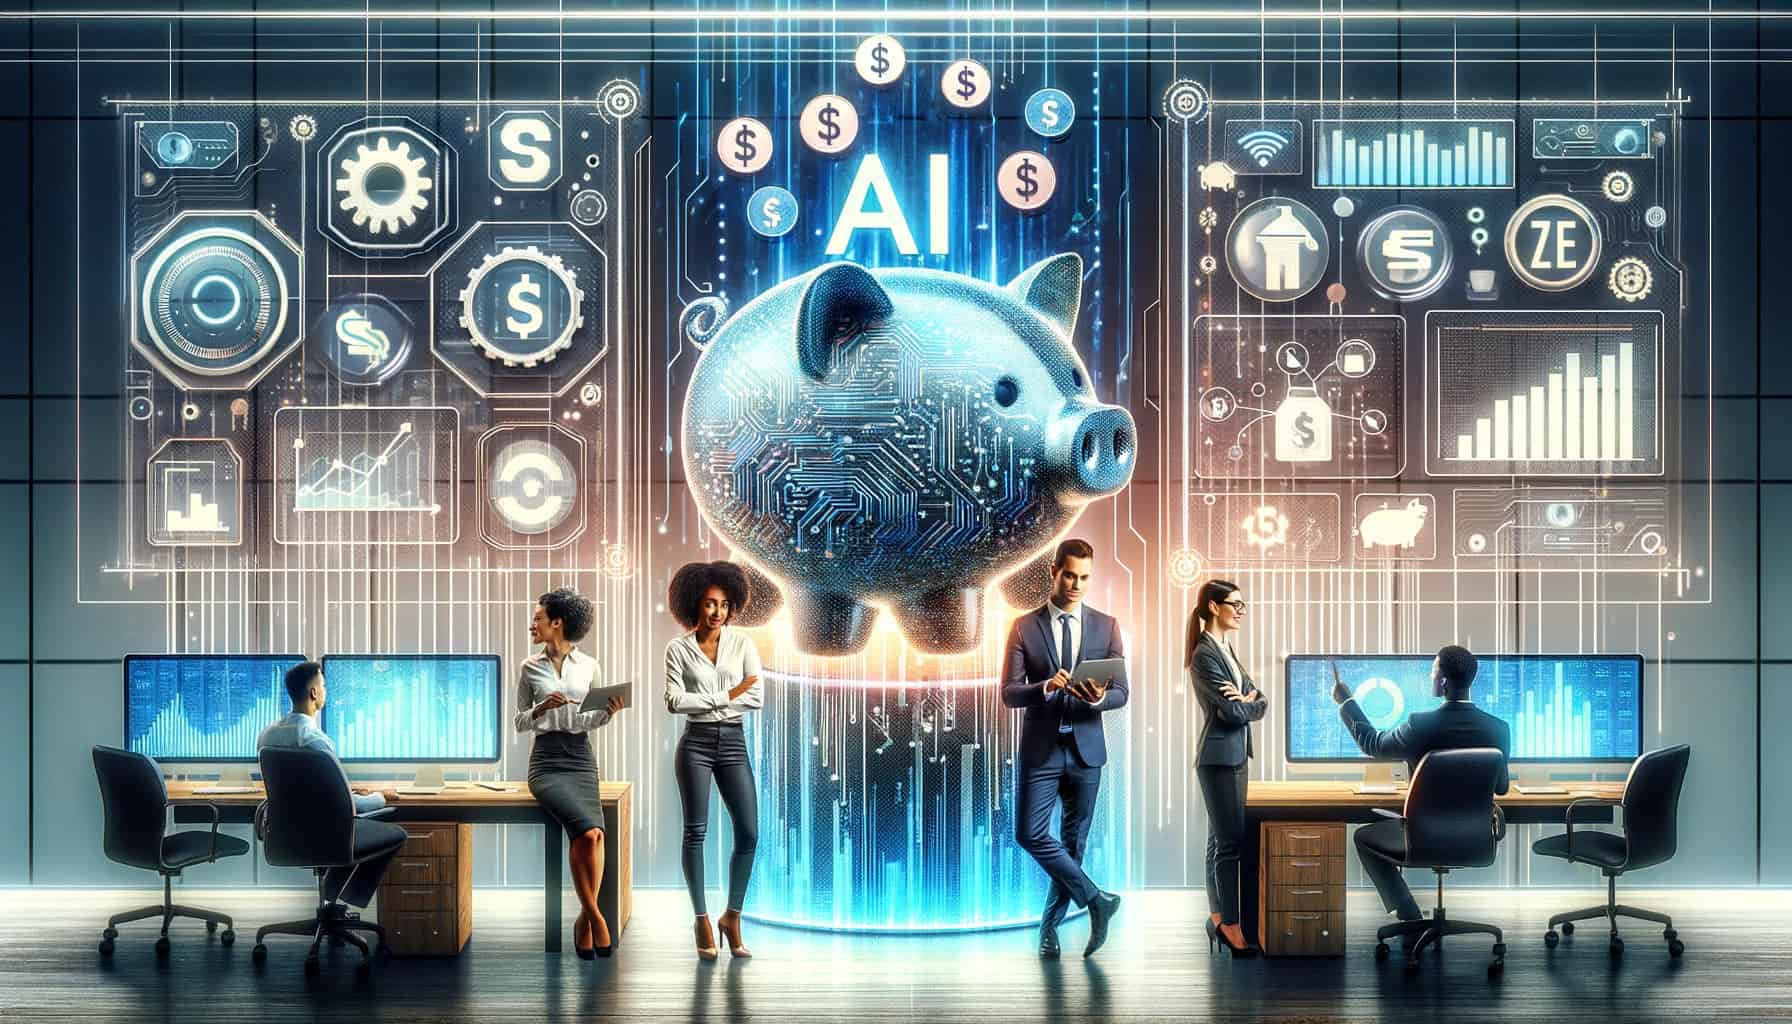 dall%c2%b7e-2023-12-15-15-39-29-a-professional-and-engaging-cover-image-for-the-article-how-ai-helps-businesses-save-money-the-image-should-feature-a-futuristic-yet-practical-off-3736814